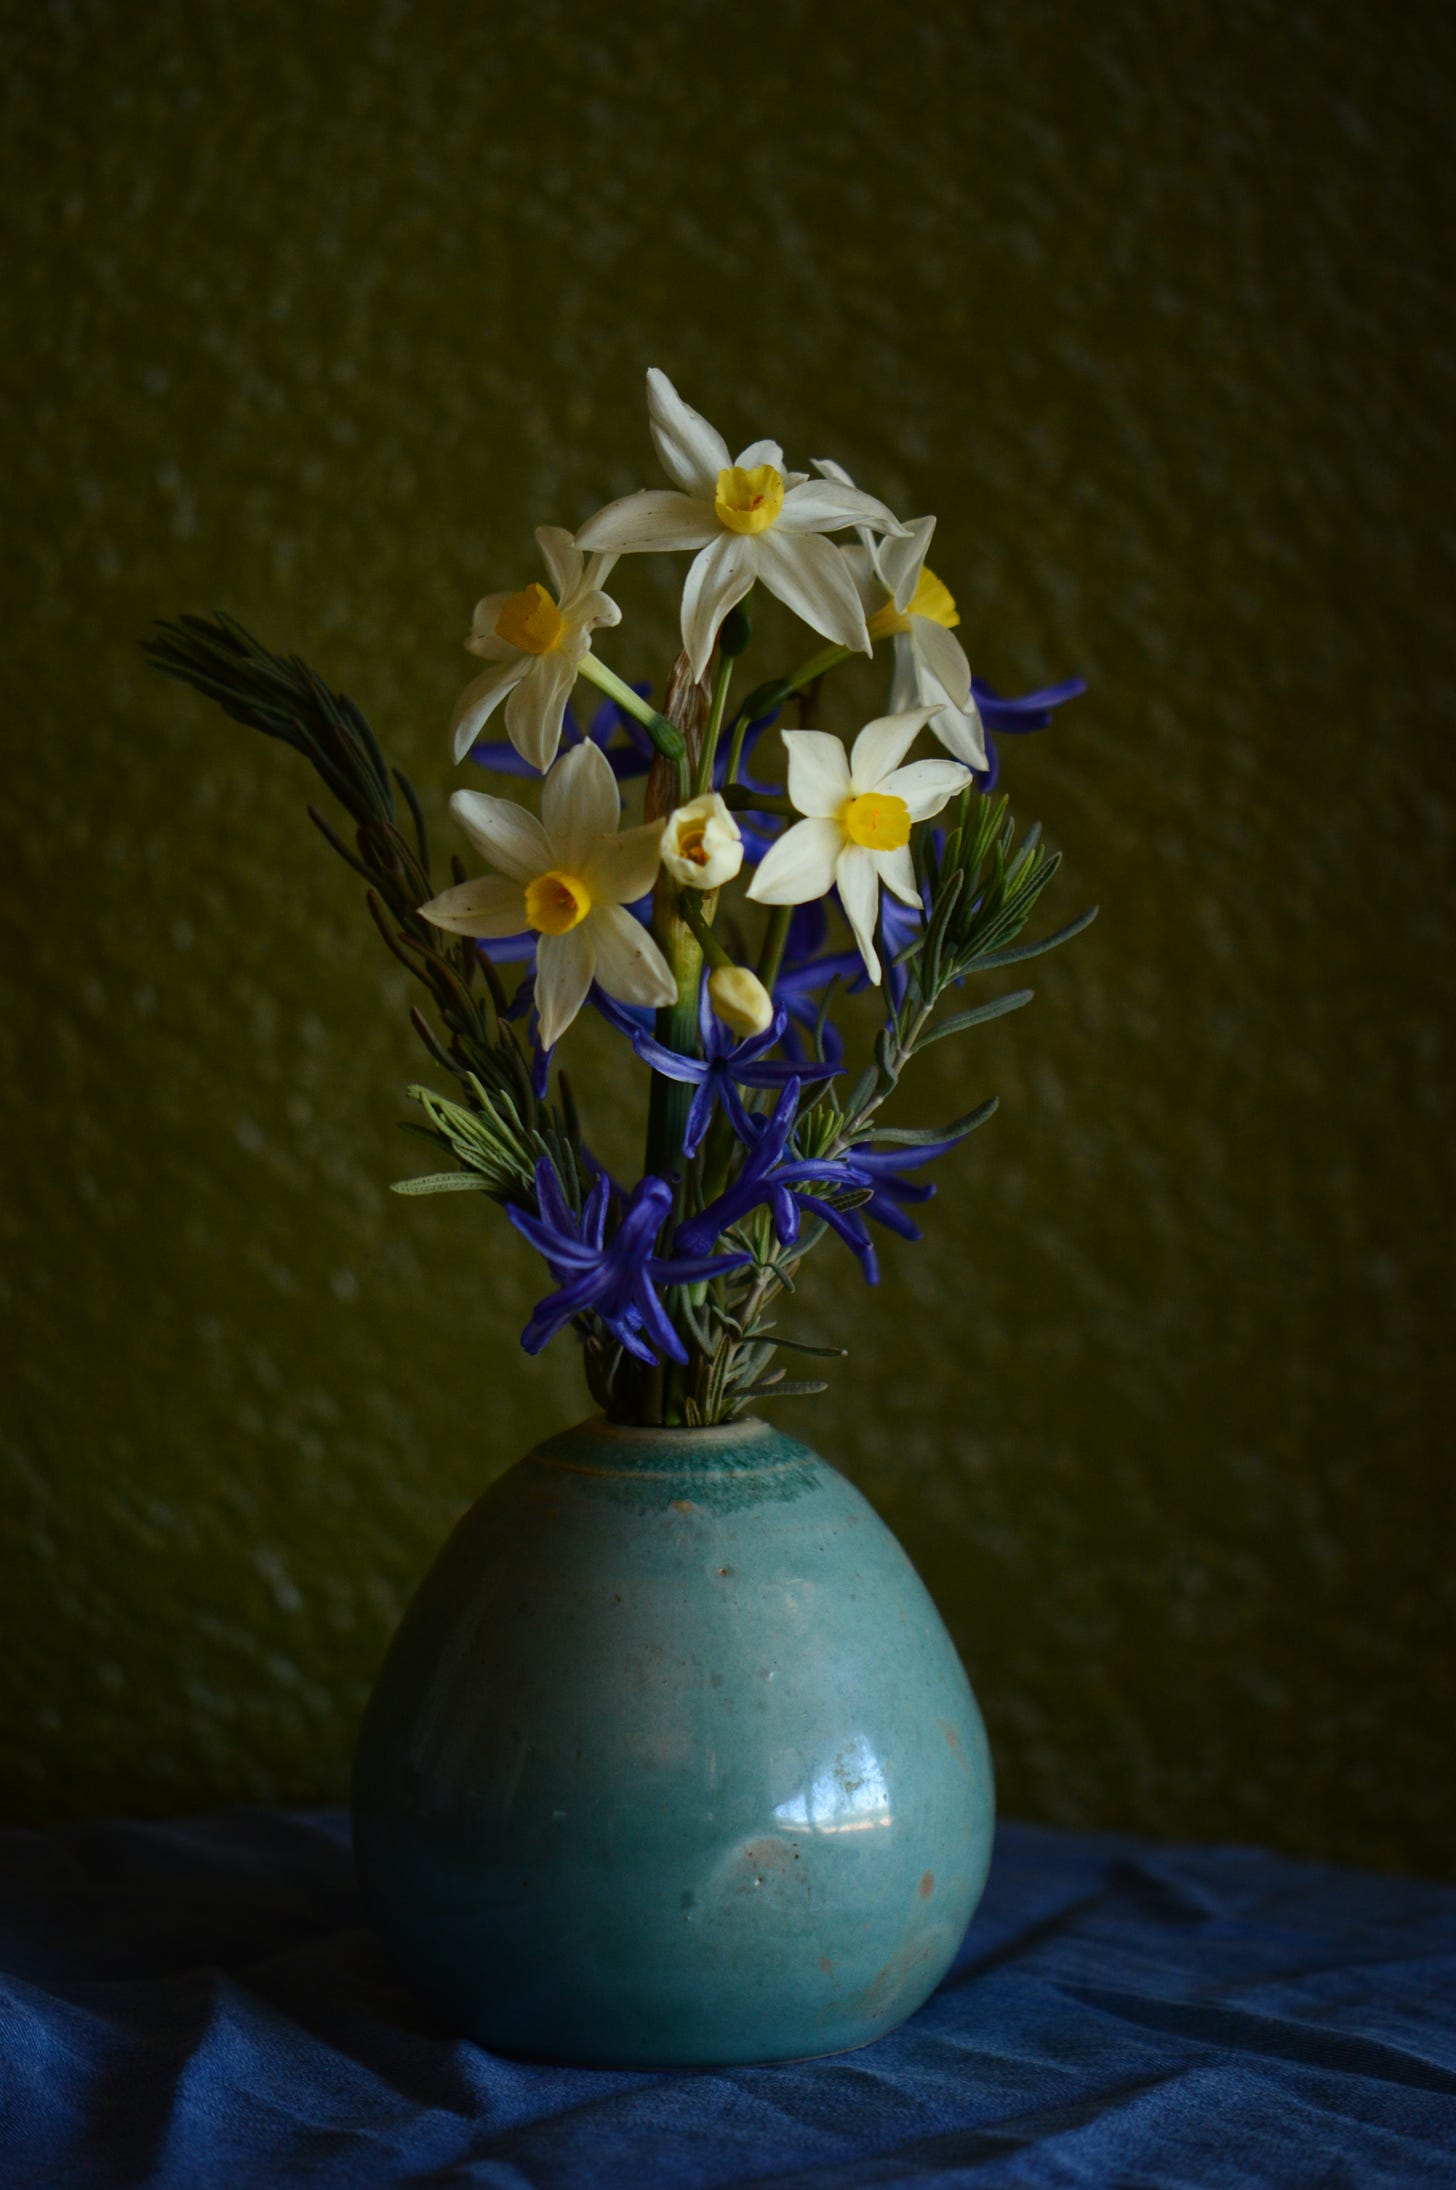 A spray of white and yellow narcissus with blue Roman hyacinths in a pale aqua-colored art vase